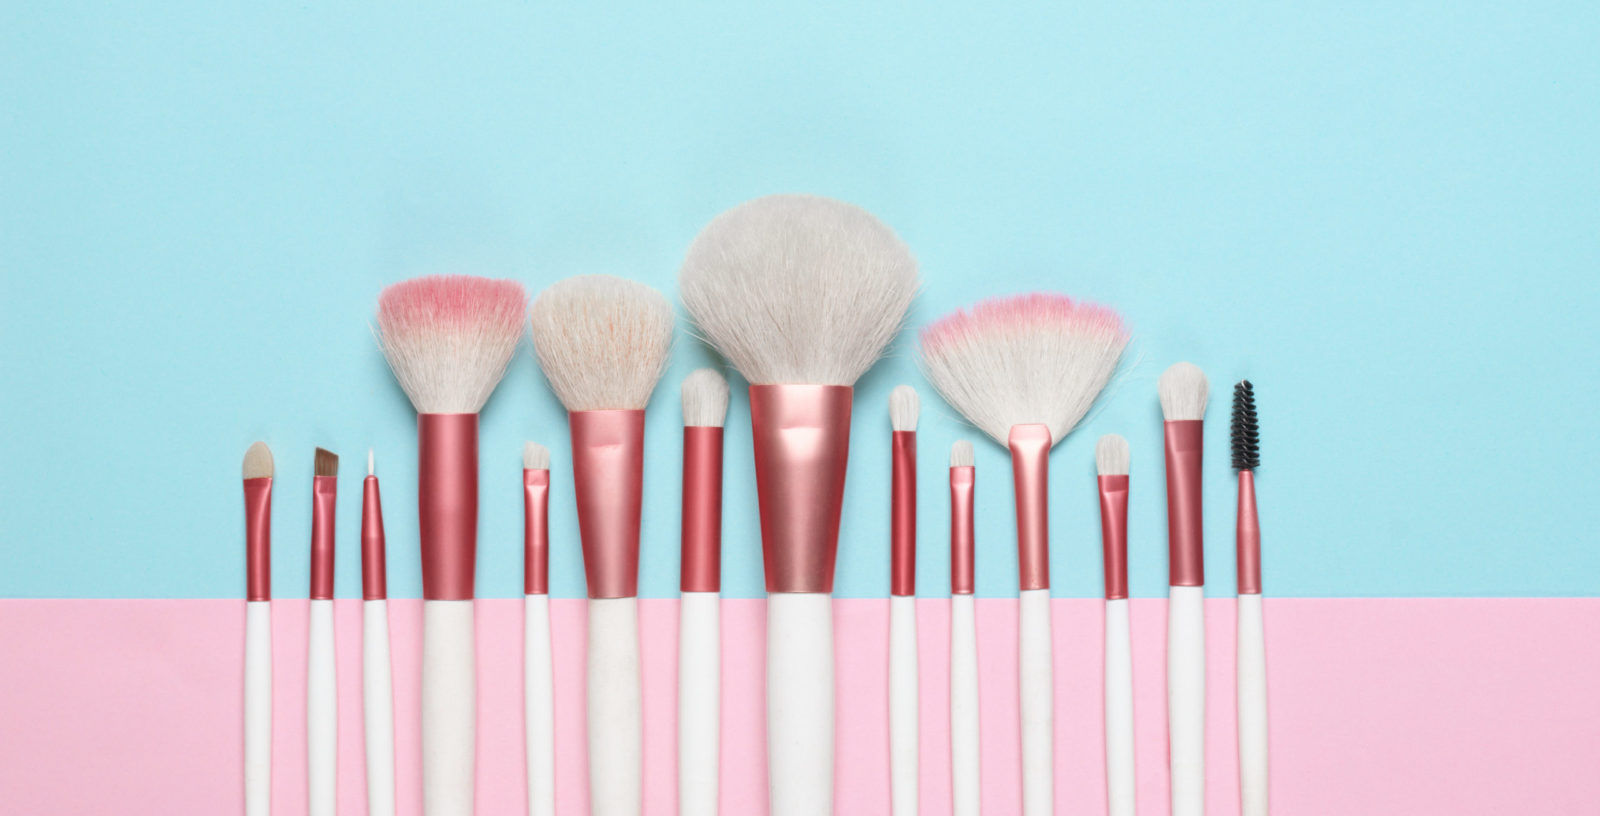 A guide to 7 makeup brushes that are investment-worthy